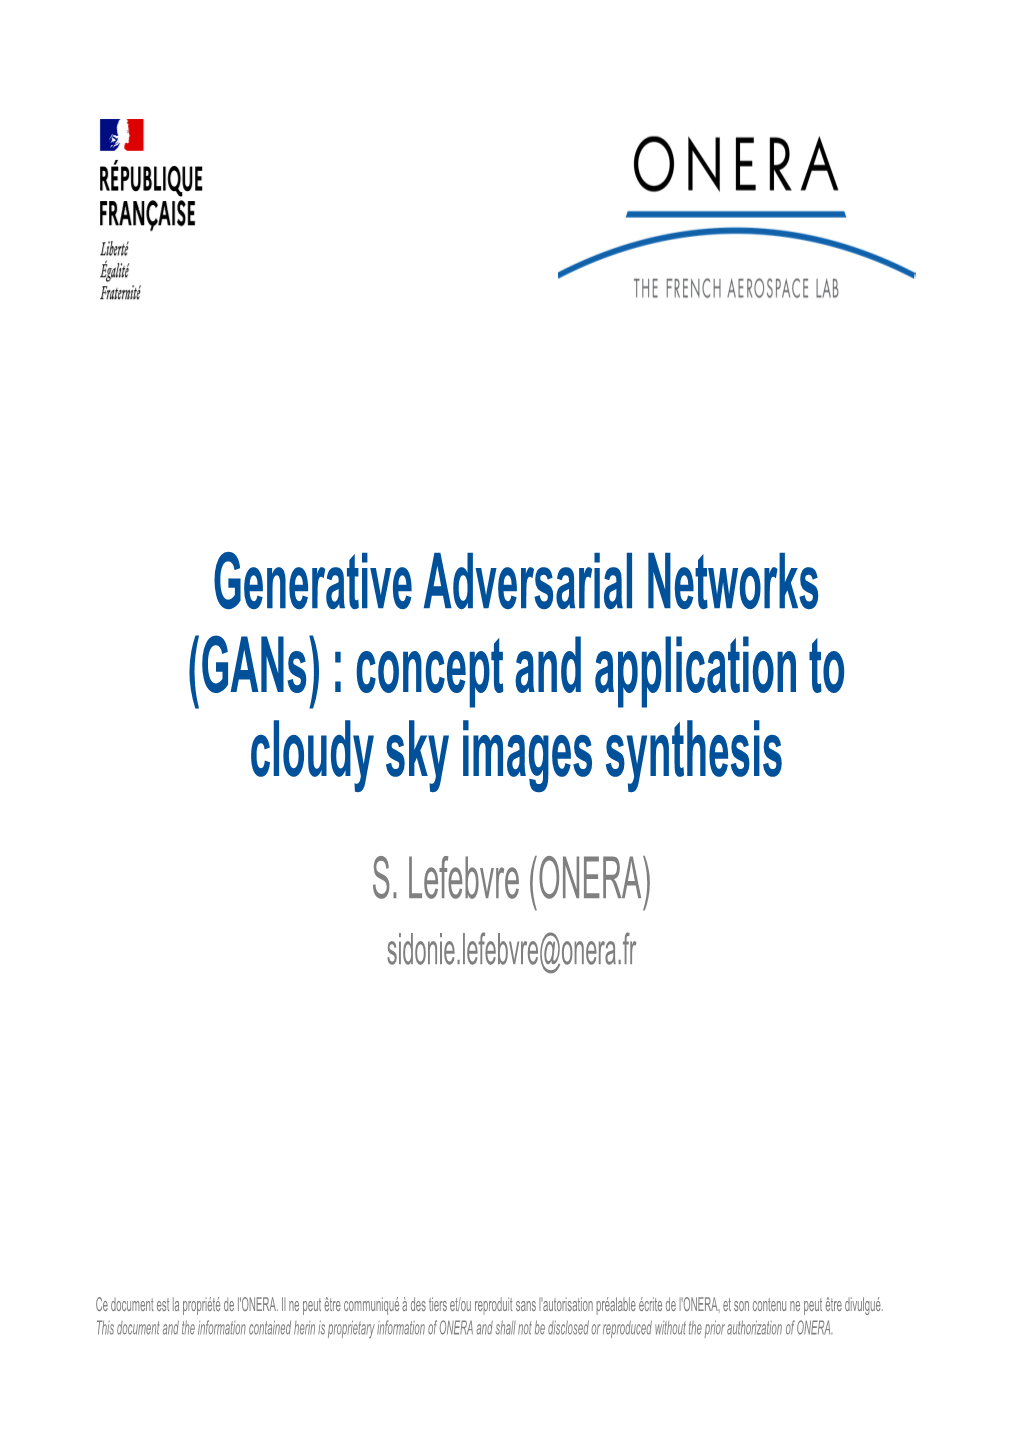 Generative Adversarial Networks (Gans) : Concept and Application to Cloudy Sky Images Synthesis